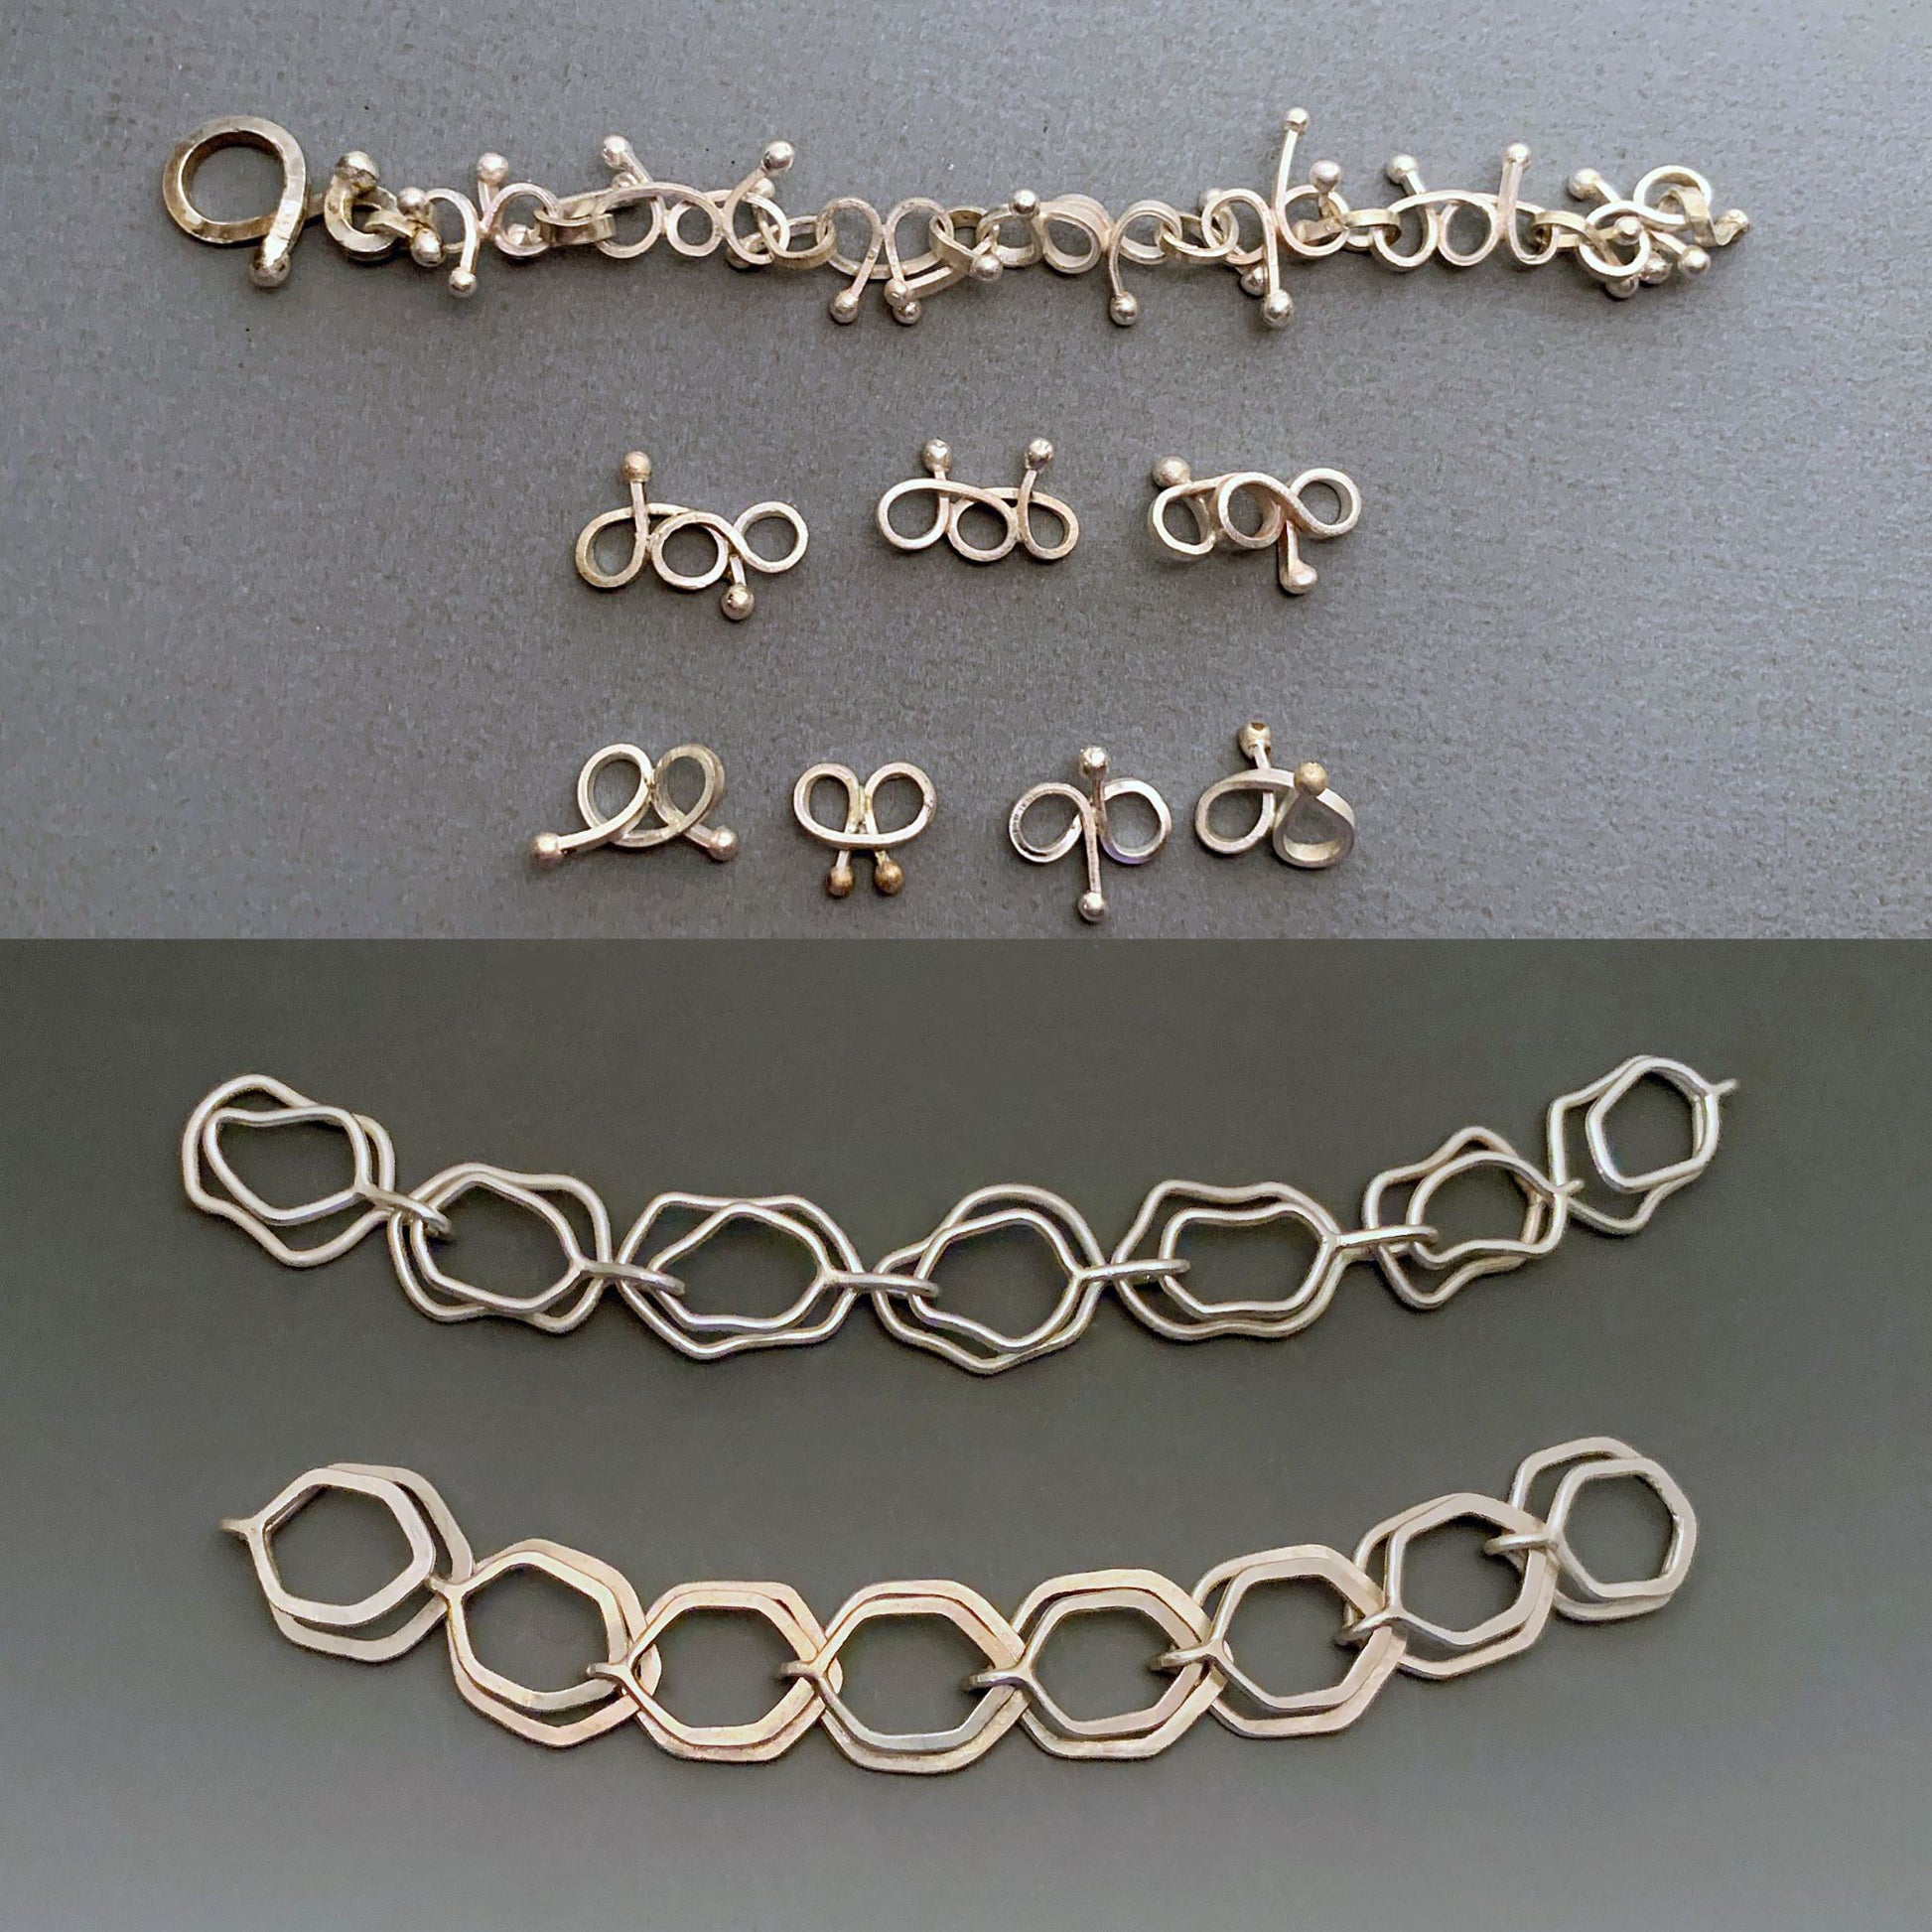 Samples of modern chains by Suzanne Williams